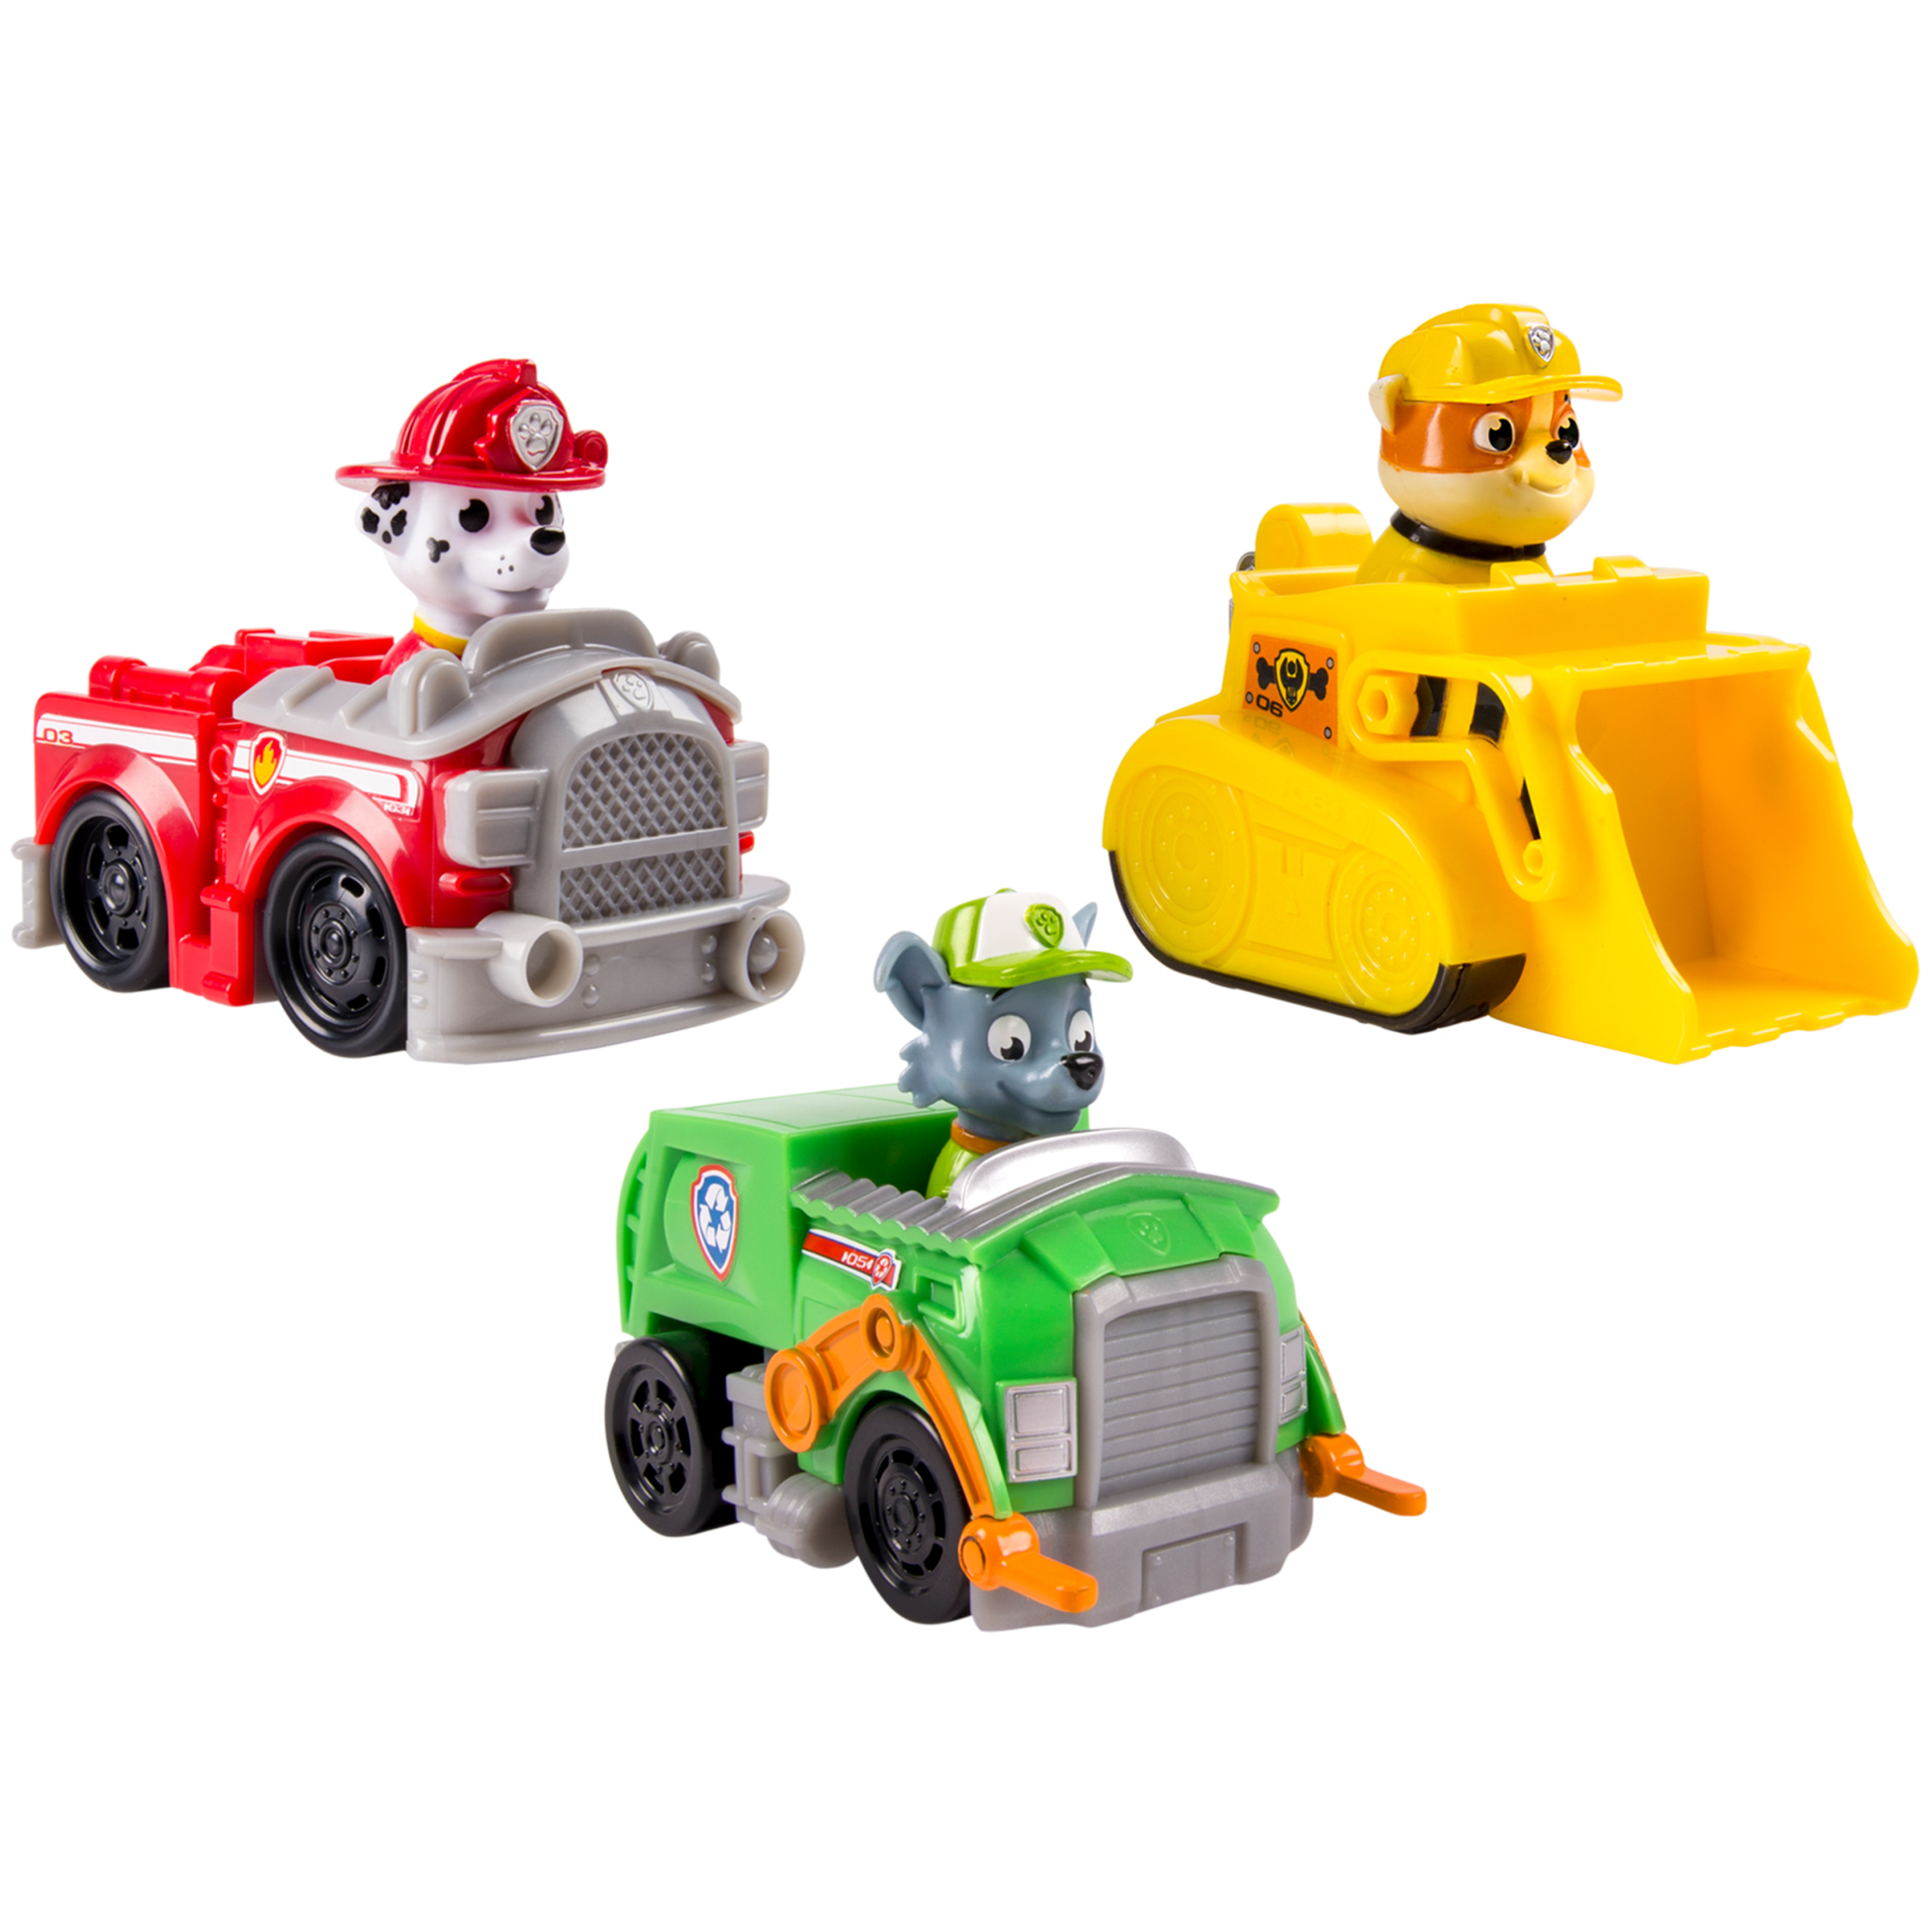 PAW Patrol Rescue Racers 3-Pack Vehicle with Figure Set - image 2 of 6